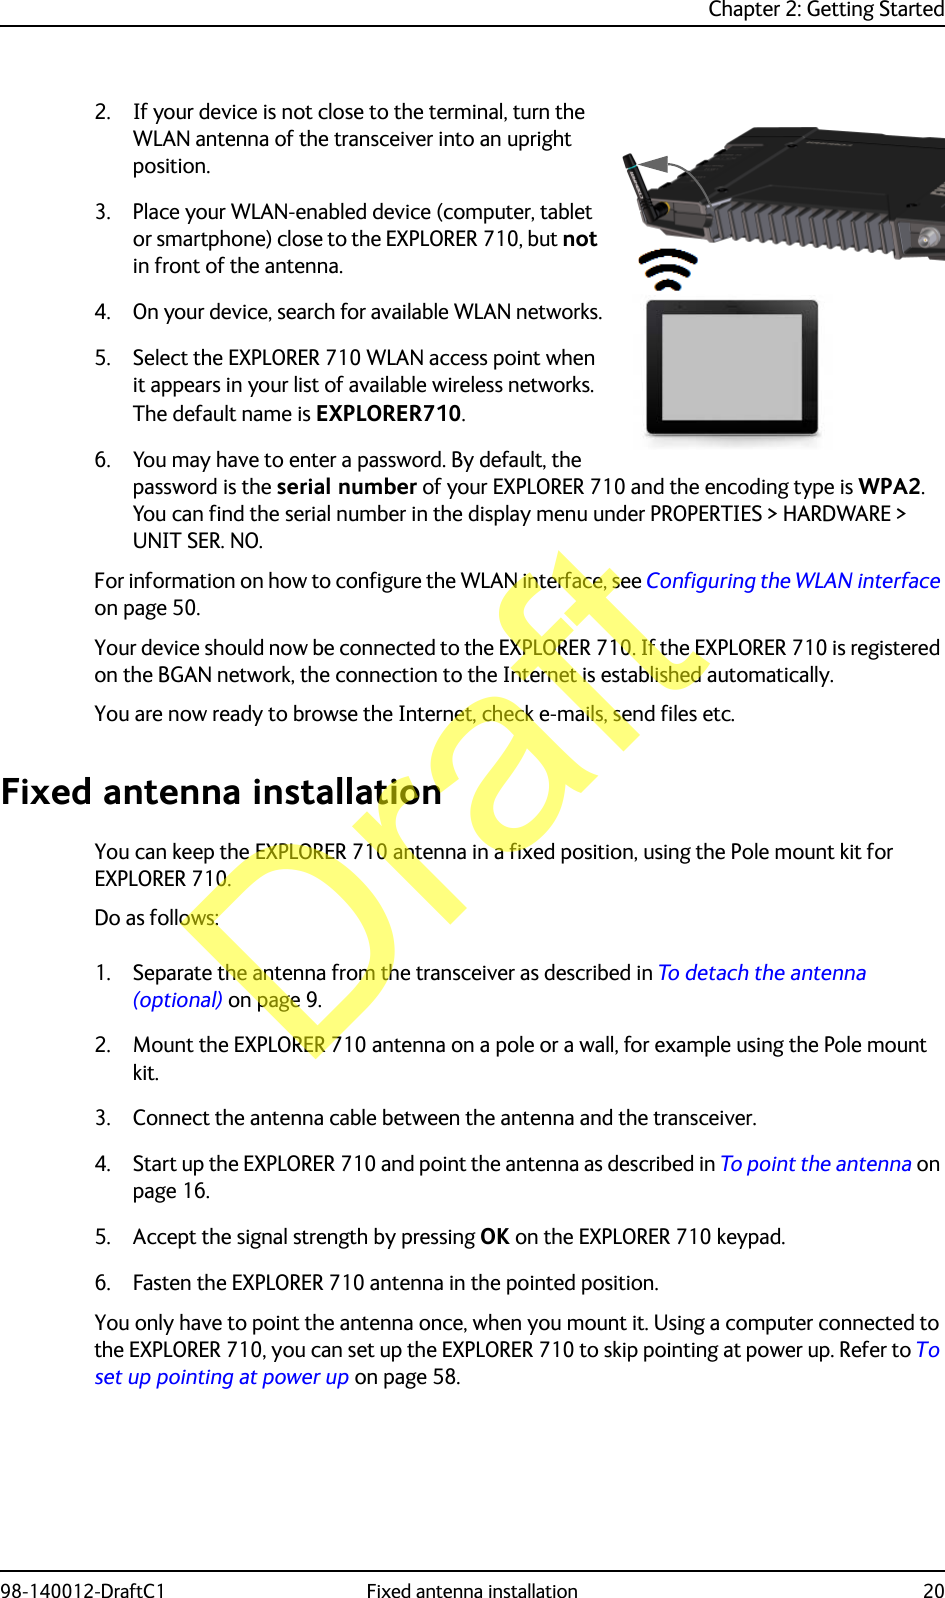 Chapter 2: Getting Started98-140012-DraftC1 Fixed antenna installation 202. If your device is not close to the terminal, turn the WLAN antenna of the transceiver into an upright position.3. Place your WLAN-enabled device (computer, tablet or smartphone) close to the EXPLORER 710, but not in front of the antenna.4. On your device, search for available WLAN networks.5. Select the EXPLORER 710 WLAN access point when it appears in your list of available wireless networks. The default name is EXPLORER710.6. You may have to enter a password. By default, the password is the serial number of your EXPLORER 710 and the encoding type is WPA2.You can find the serial number in the display menu under PROPERTIES &gt; HARDWARE &gt; UNIT SER. NO.For information on how to configure the WLAN interface, see Configuring the WLAN interface on page 50.Your device should now be connected to the EXPLORER 710. If the EXPLORER 710 is registered on the BGAN network, the connection to the Internet is established automatically.You are now ready to browse the Internet, check e-mails, send files etc.Fixed antenna installationYou can keep the EXPLORER 710 antenna in a fixed position, using the Pole mount kit for EXPLORER 710.Do as follows:1. Separate the antenna from the transceiver as described in To detach the antenna (optional) on page 9.2. Mount the EXPLORER 710 antenna on a pole or a wall, for example using the Pole mount kit.3. Connect the antenna cable between the antenna and the transceiver.4. Start up the EXPLORER 710 and point the antenna as described in To point the antenna on page 16. 5. Accept the signal strength by pressing OK on the EXPLORER 710 keypad.6. Fasten the EXPLORER 710 antenna in the pointed position. You only have to point the antenna once, when you mount it. Using a computer connected to the EXPLORER 710, you can set up the EXPLORER 710 to skip pointing at power up. Refer to To set up pointing at power up on page 58.Draft